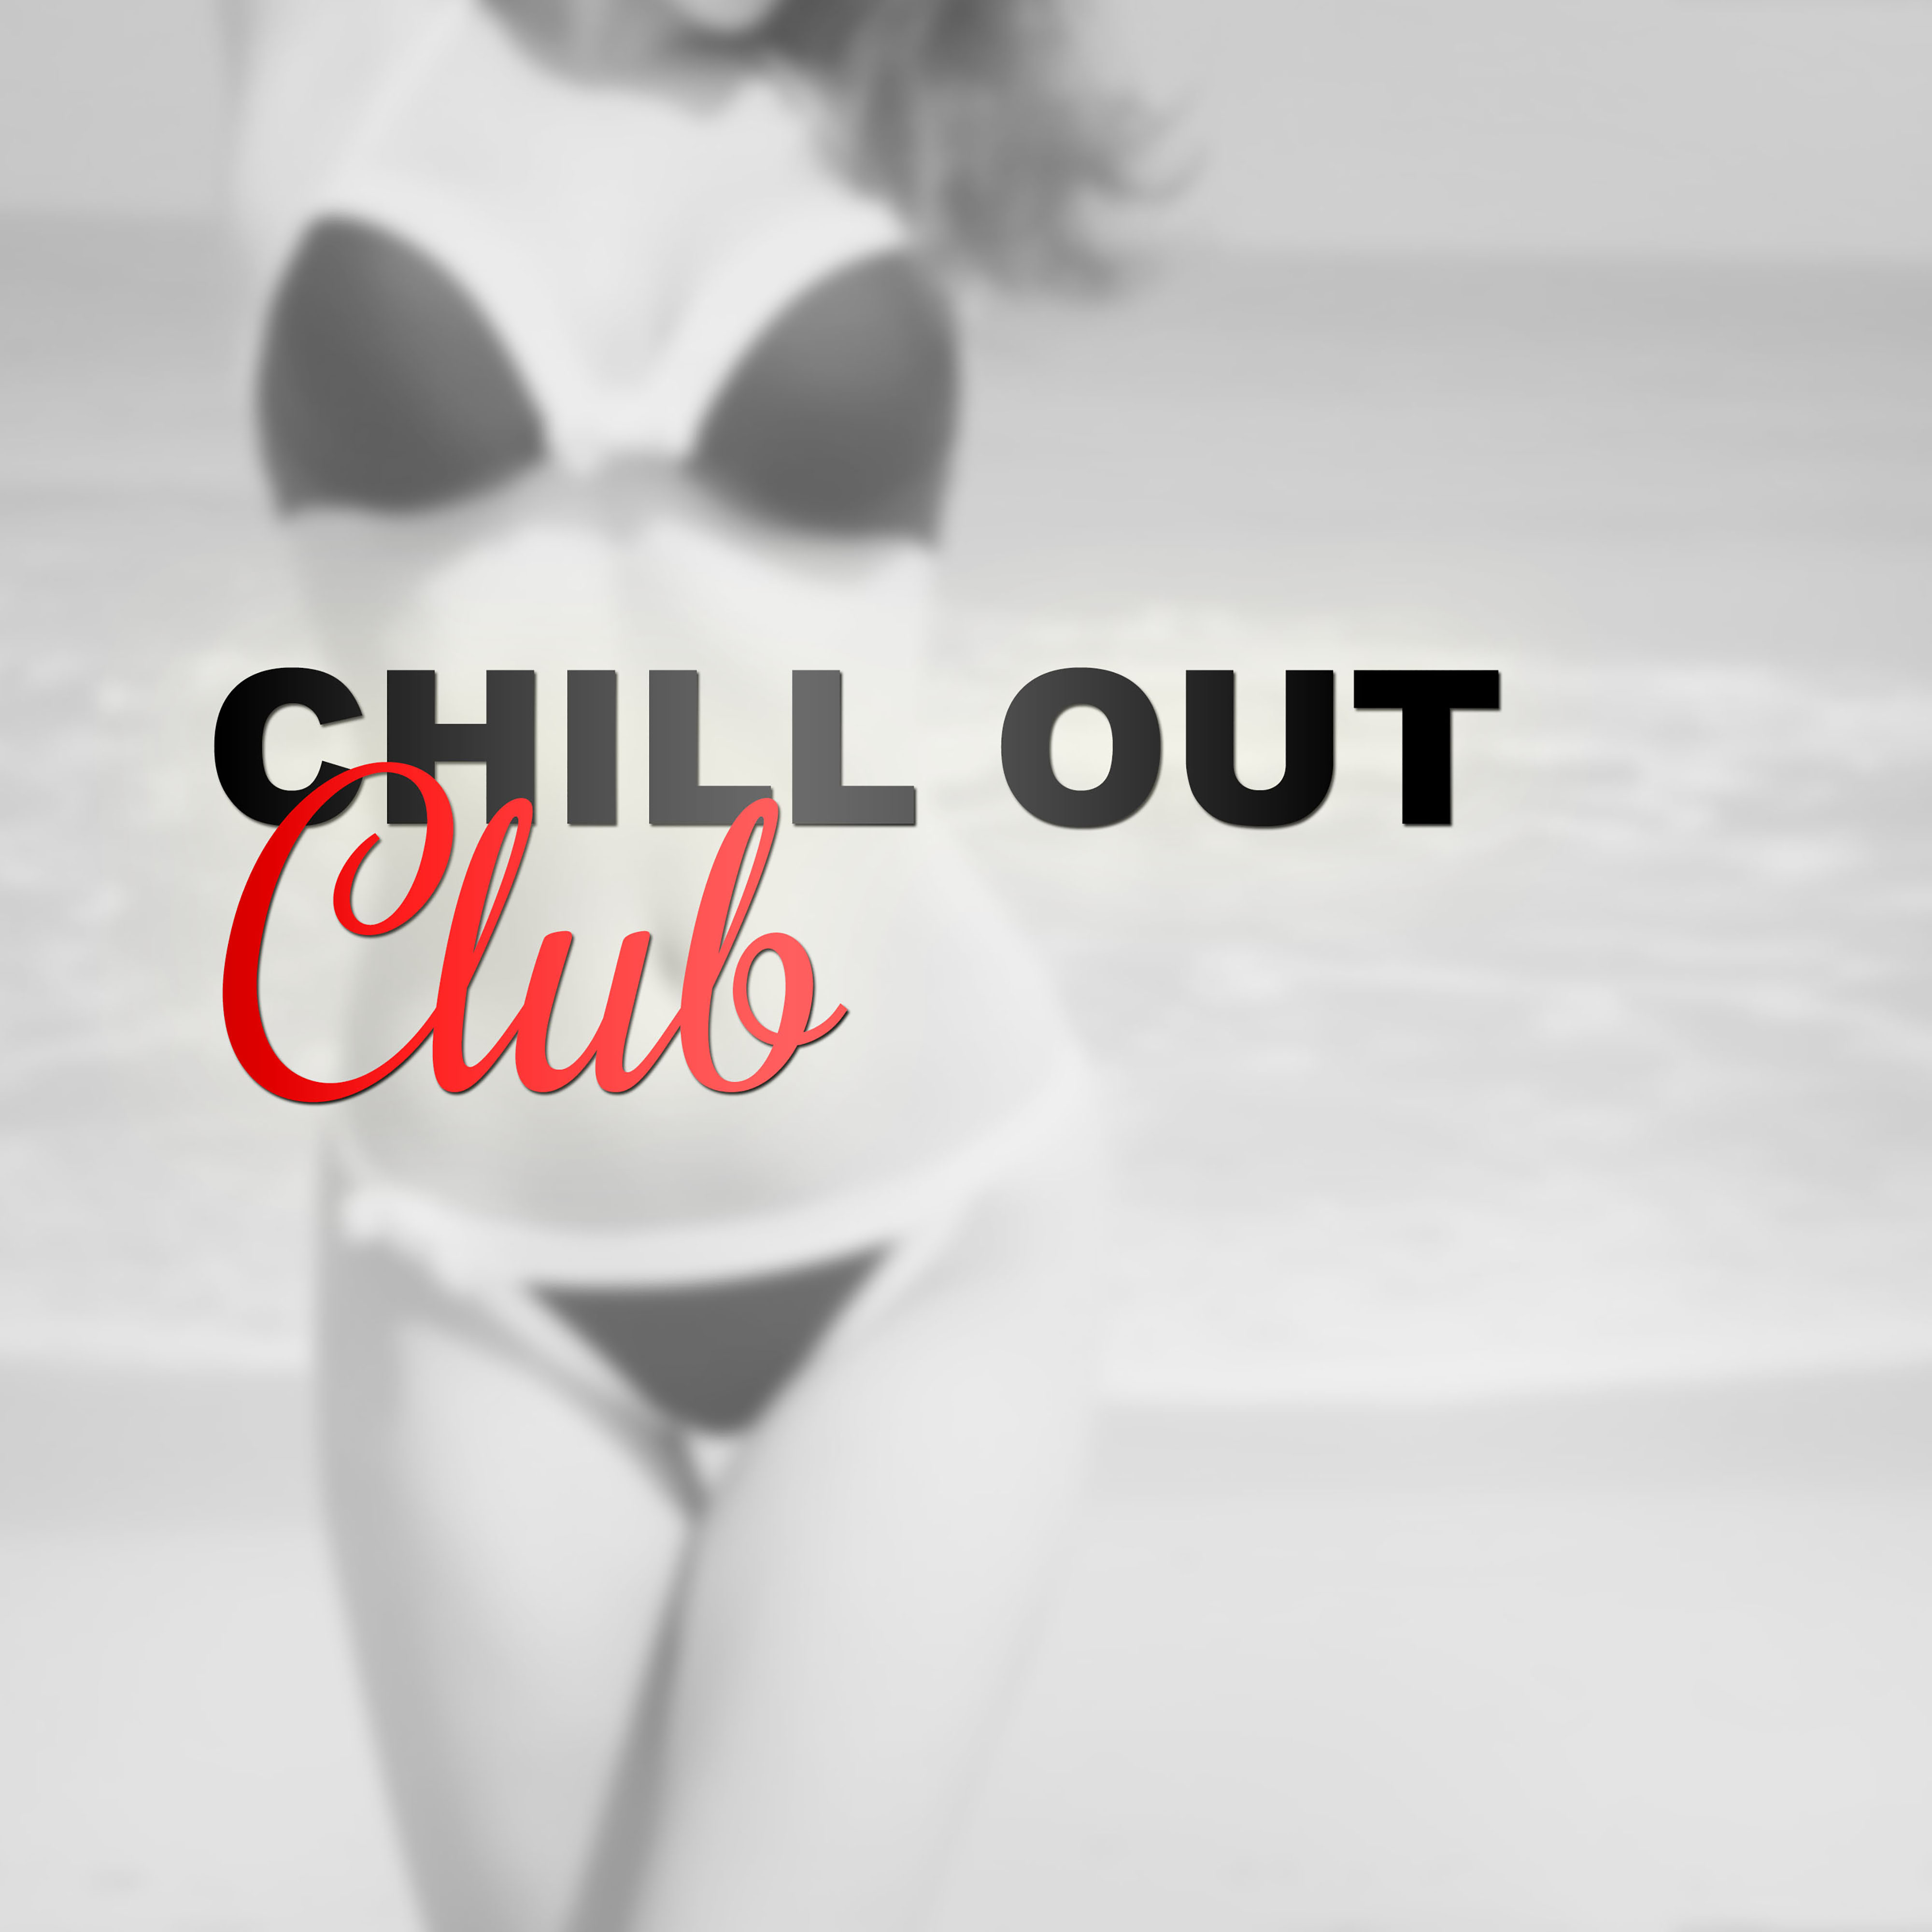 Chill Out Club – Deep Chill Out Music, Ambient Lounge, Chill Out Music for Club & Bar, Best Chill, Lounge Tunes, Chillout Hits